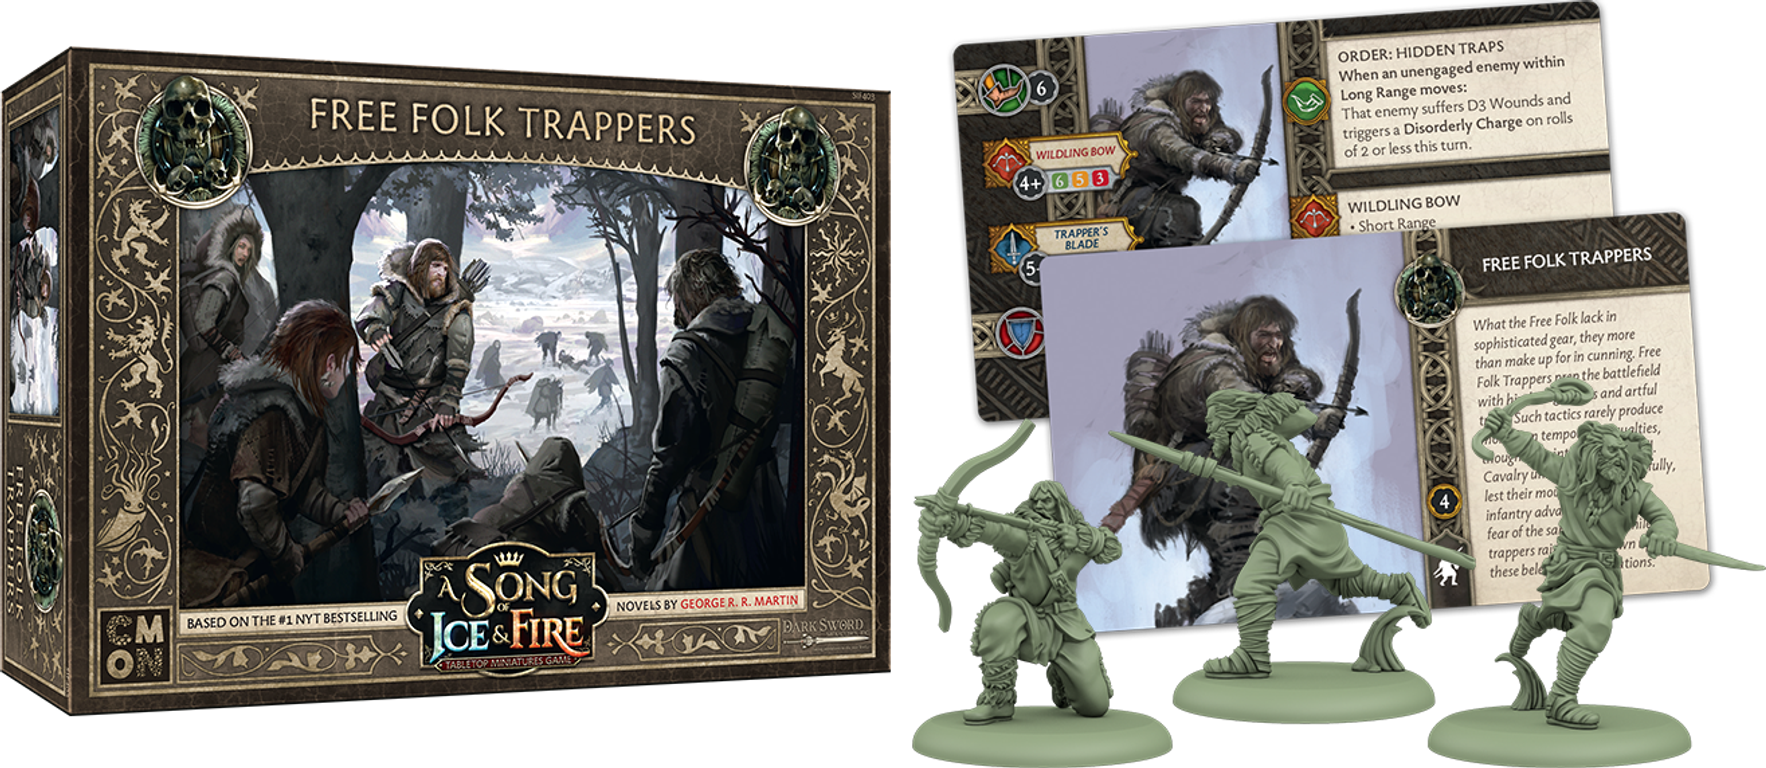 A Song of Ice & Fire: Tabletop Miniatures Game – Free Folk Trappers partes